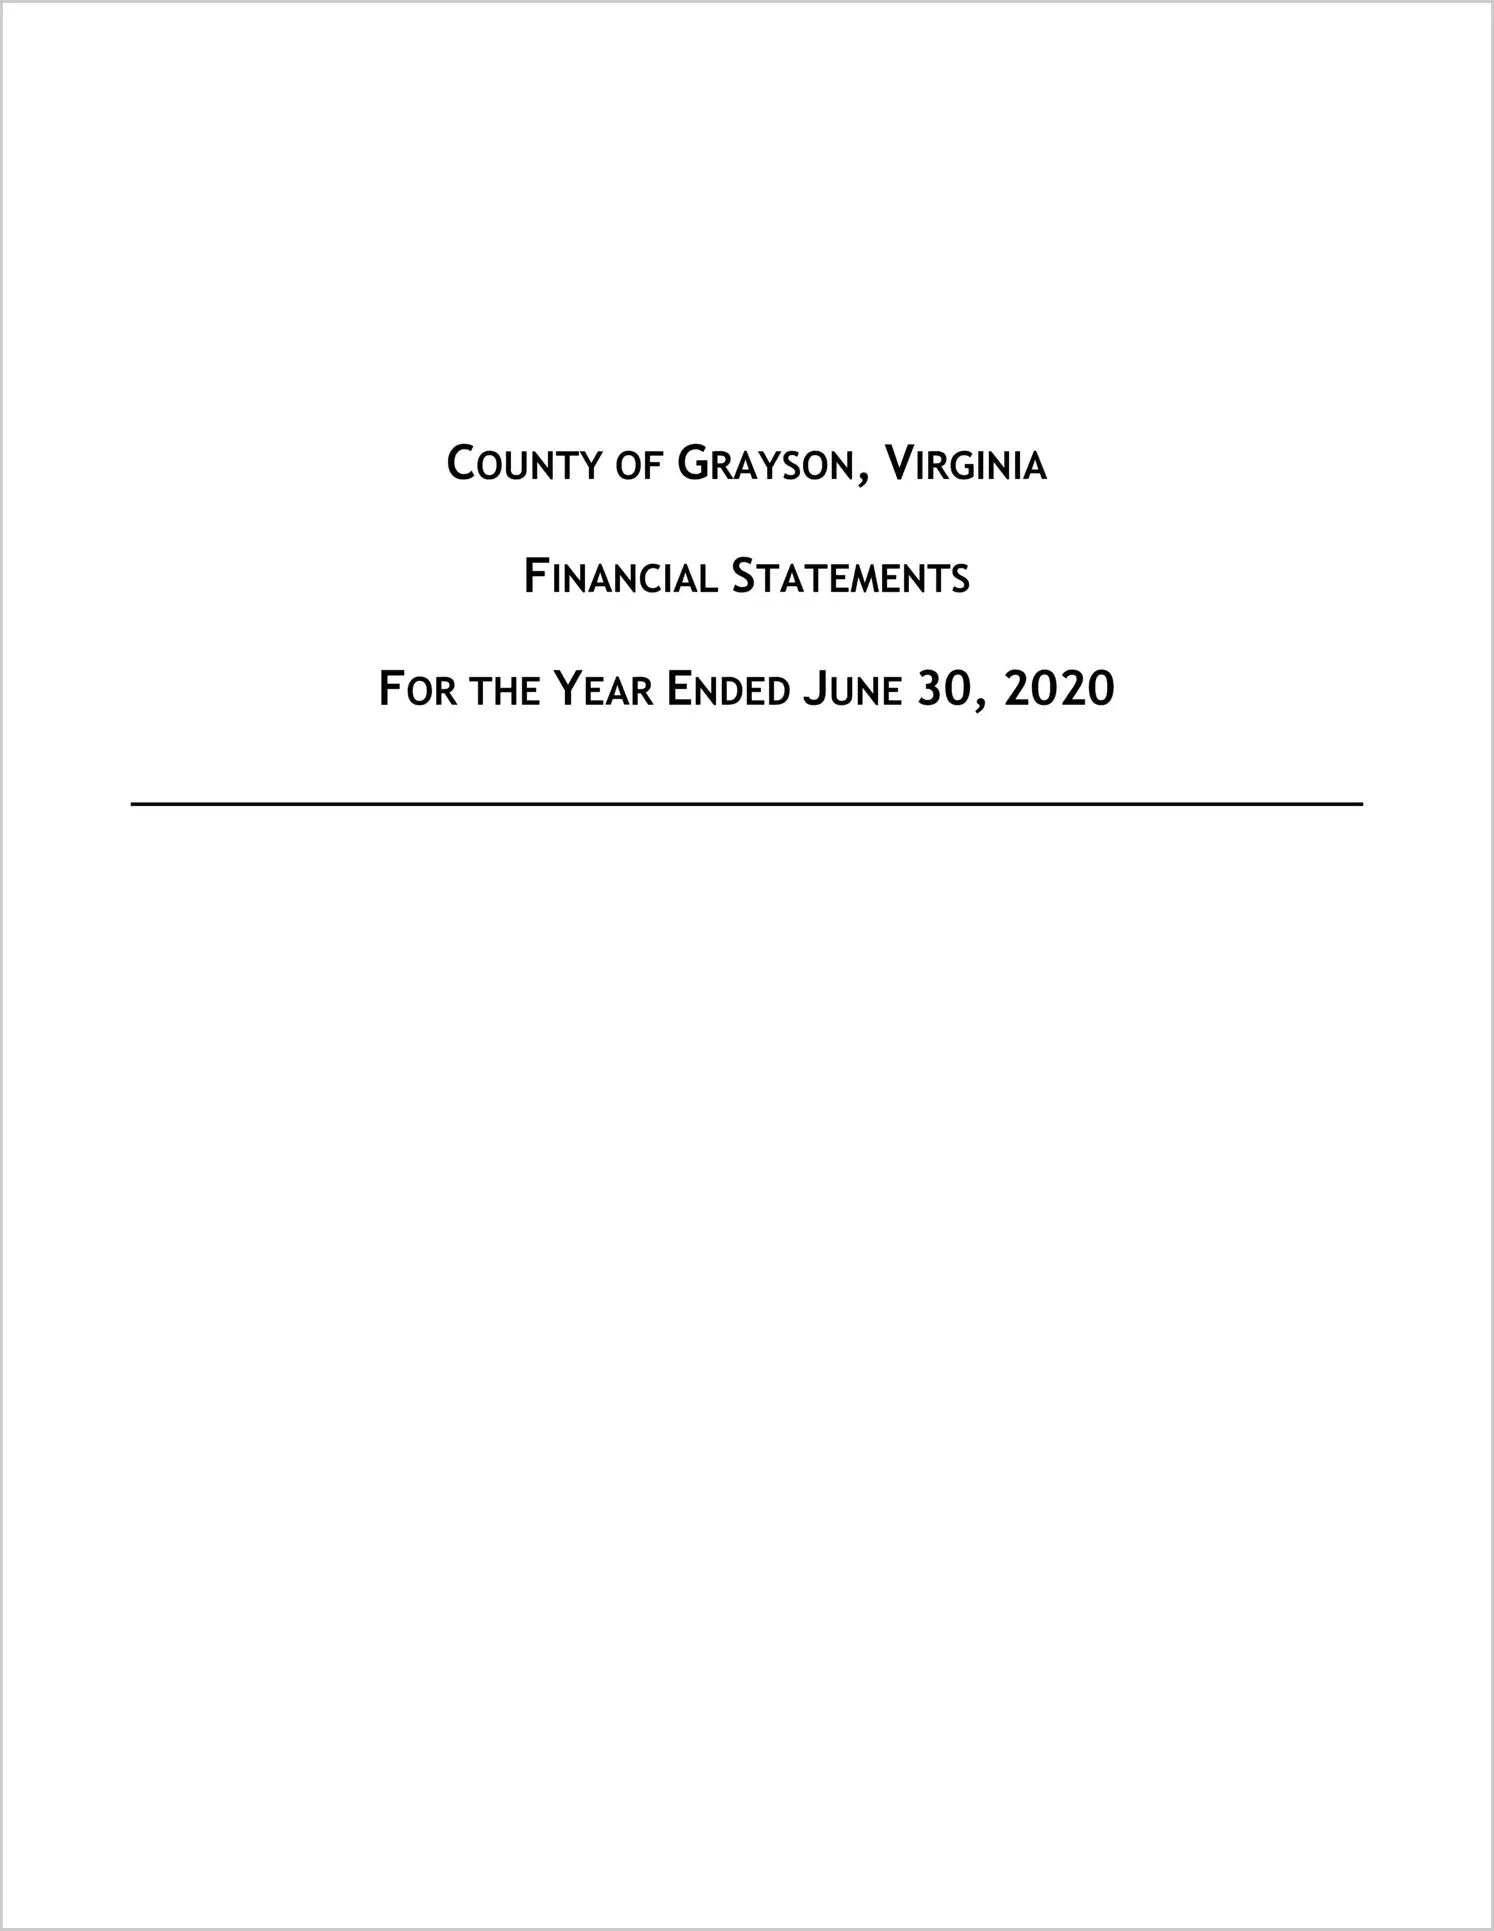 2020 Annual Financial Report for County of Grayson